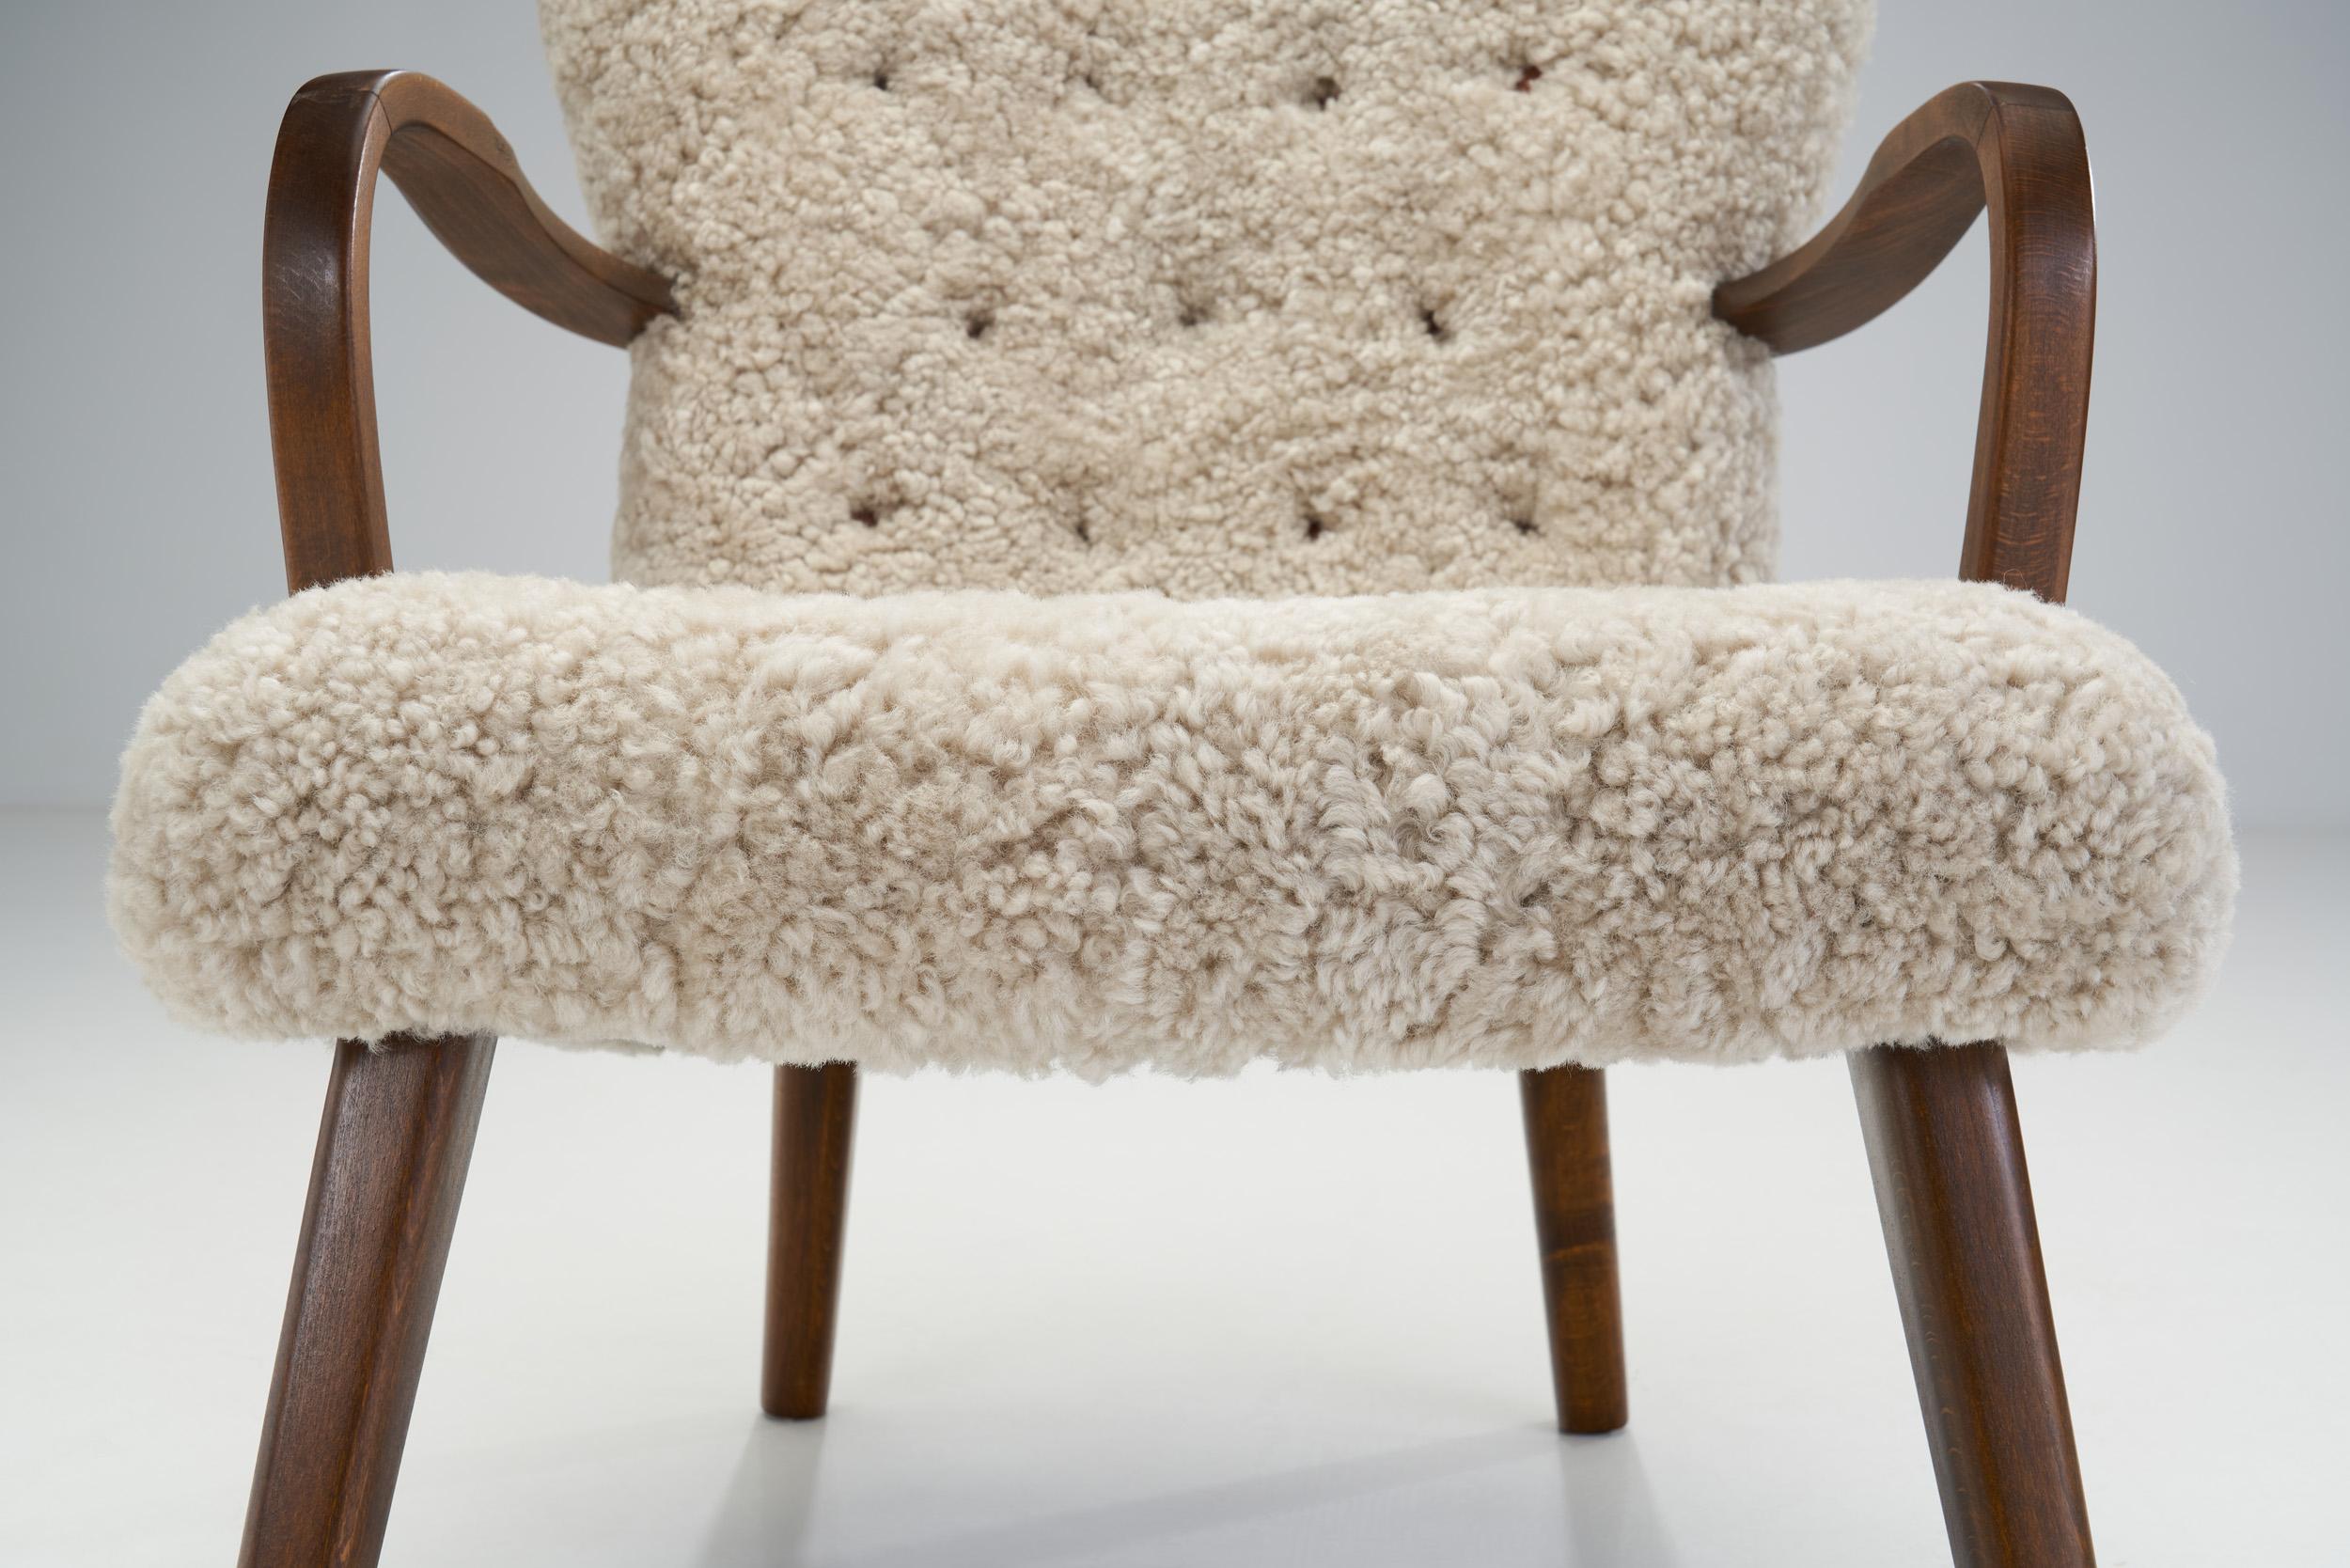 Stained Beech Easy Chairs in Sheepskin by a Danish Cabinetmaker, Denmark 1940s For Sale 5